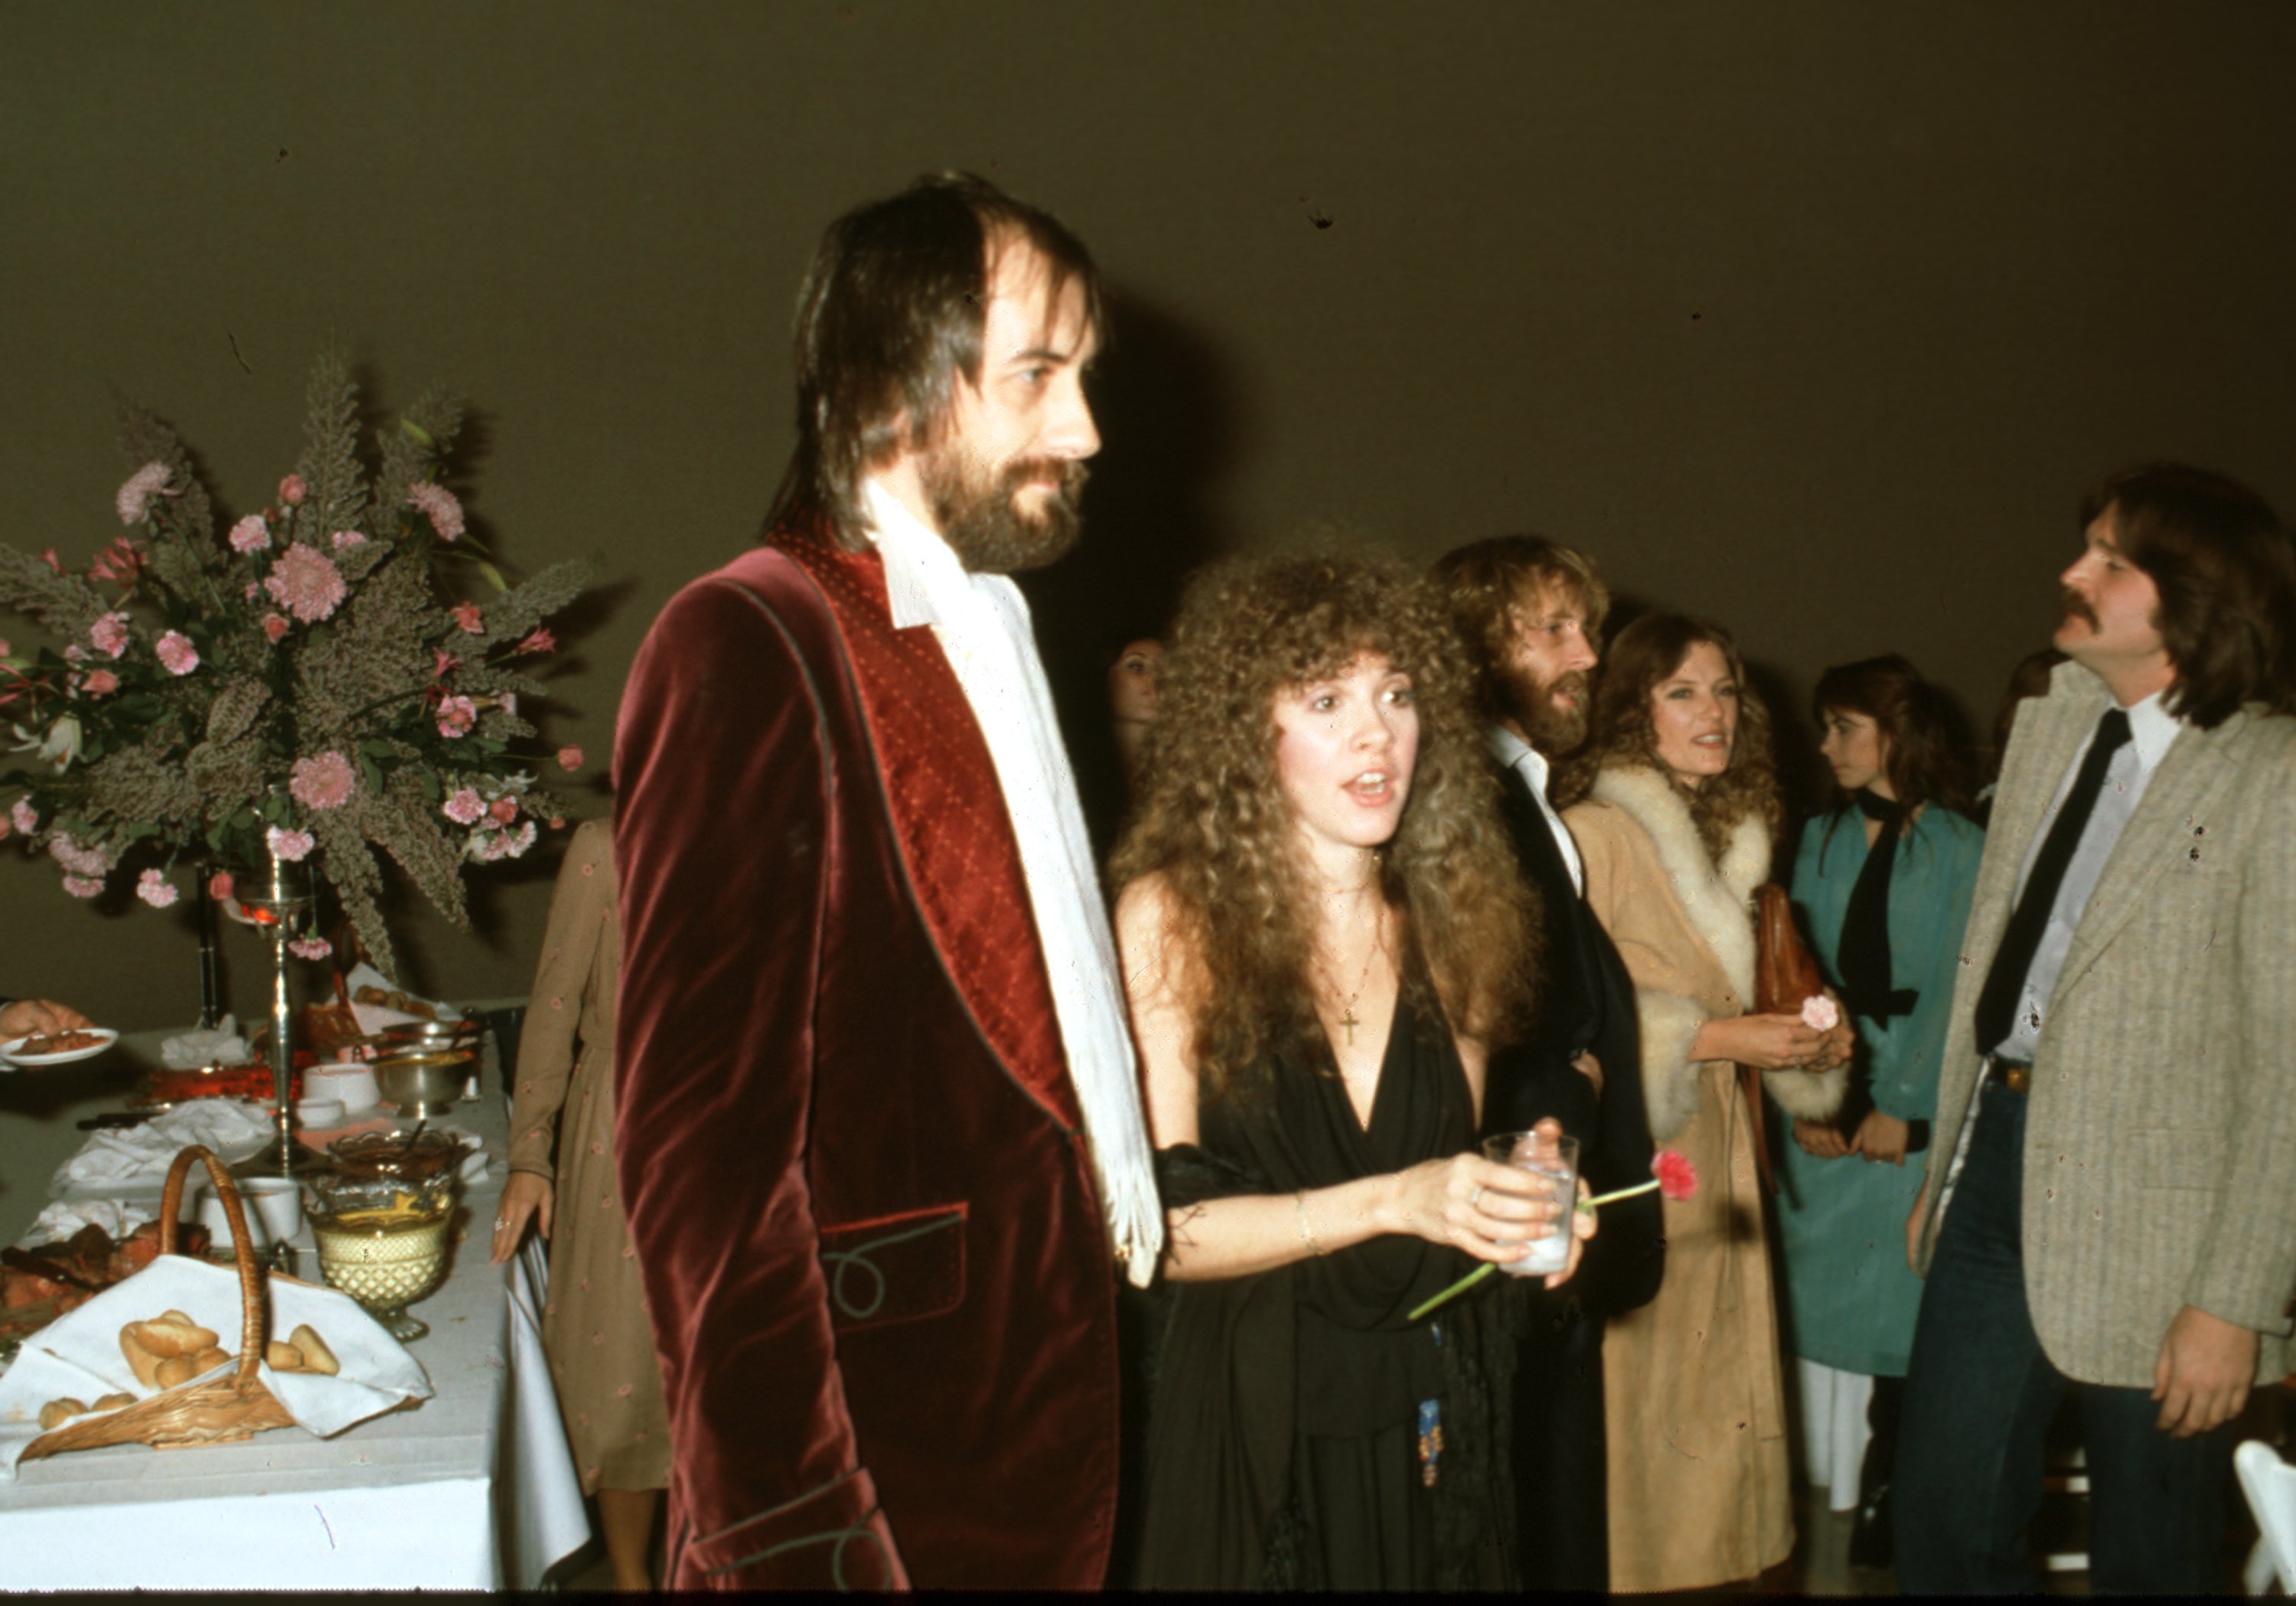 Mick Fleetwood wears a red velvet coat and Stevie Nicks wears a black dress. She holds a glass and a flower.